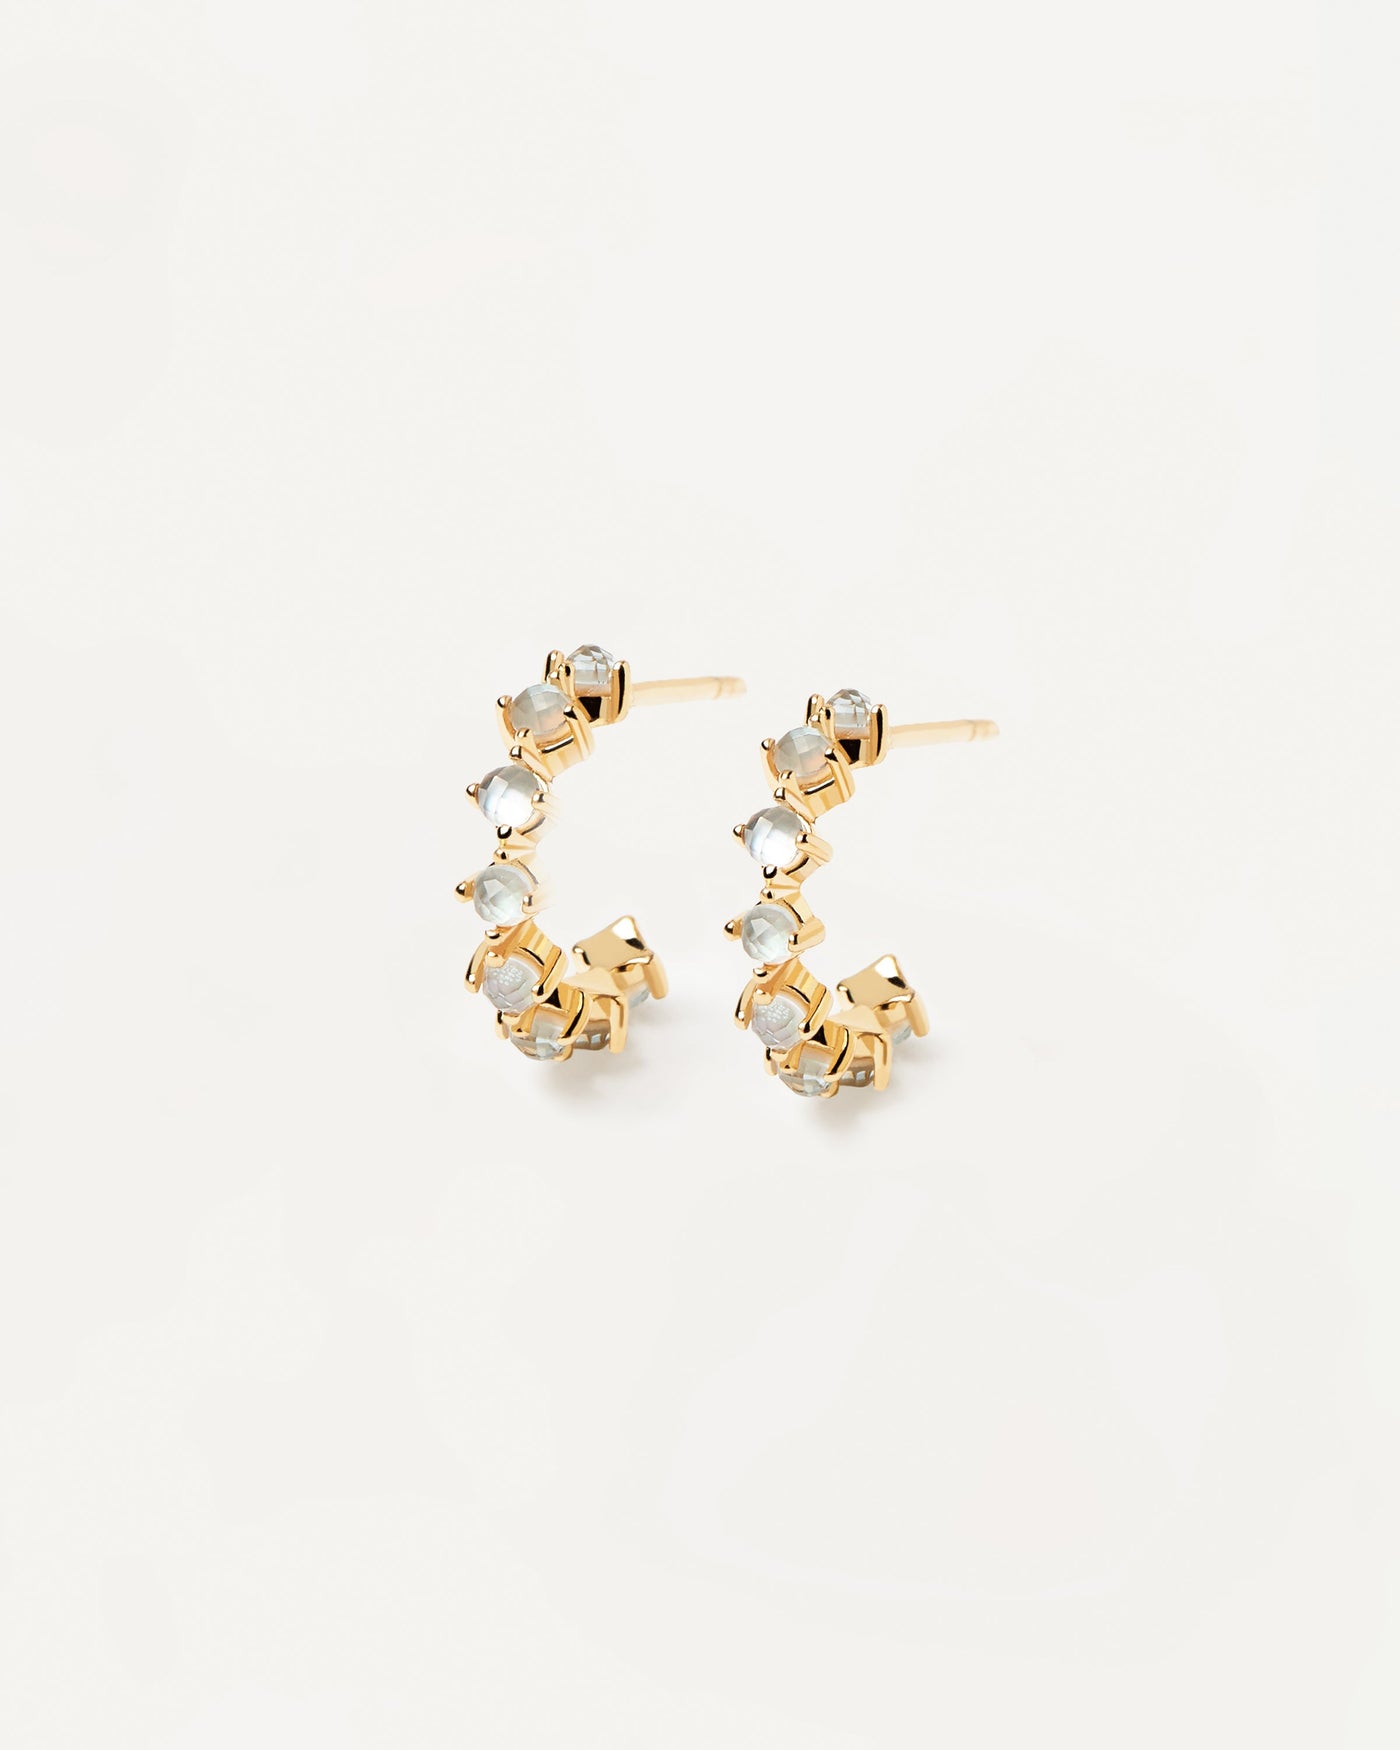 2022 Selection | Mint Bird Earrings. Get the latest arrival from PDPAOLA. Place your order safely and get this Best Seller. Free Shipping over 40€